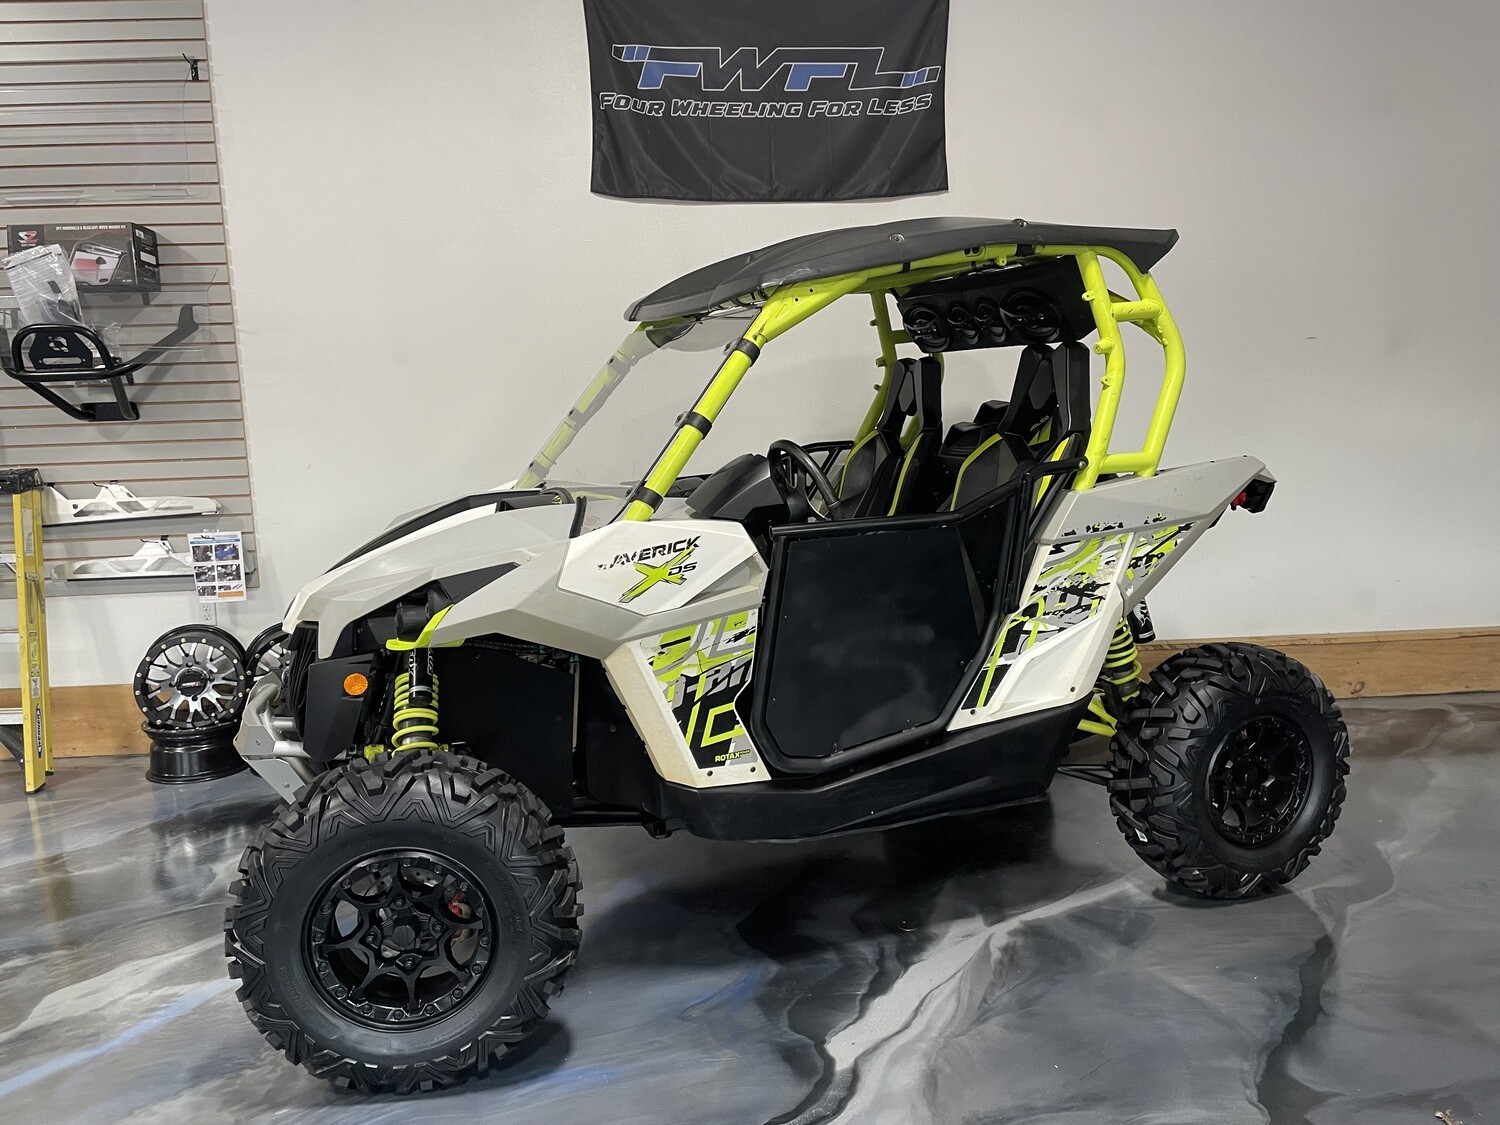 2015 Can-Am Maverick 1000R X DS Turbo - As low as $293/Month!